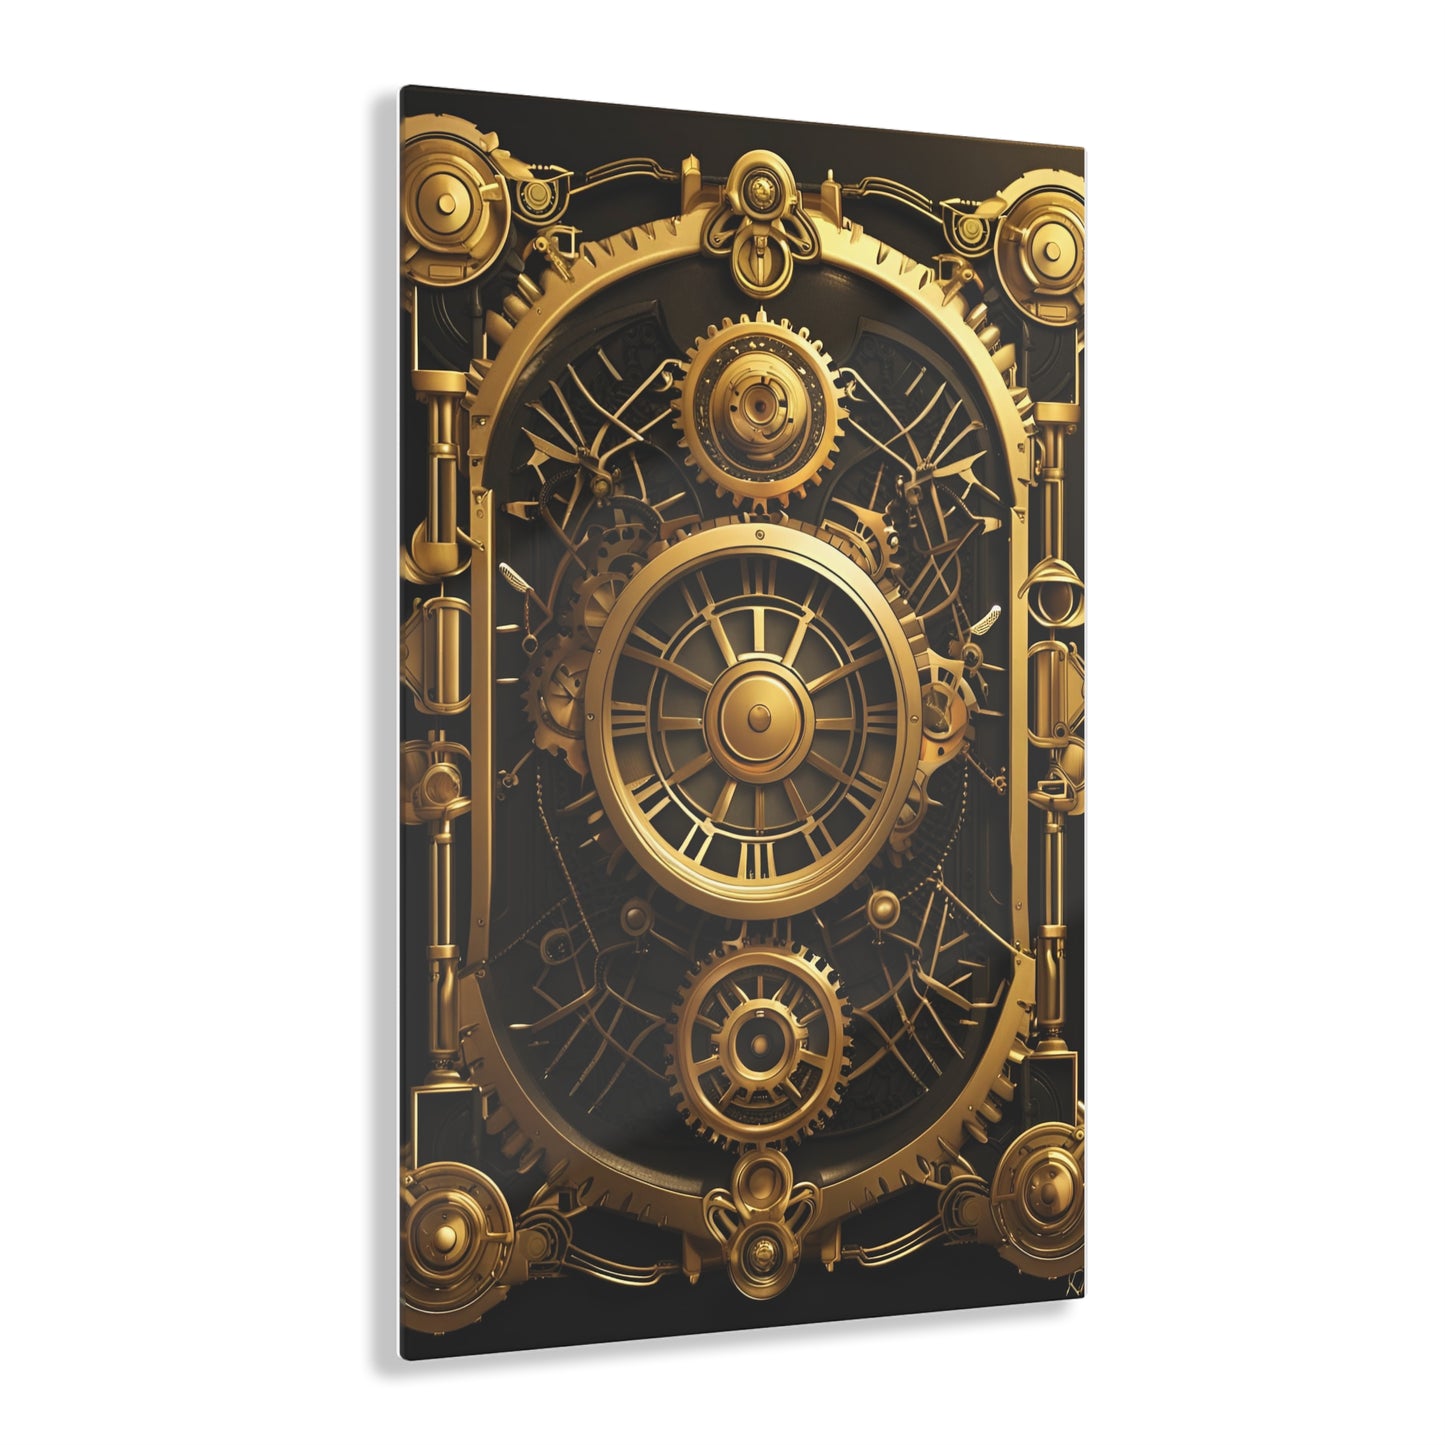 Art Deco themed steampunk gold and copper gears panel style printed on a crystal clear acrylic panel